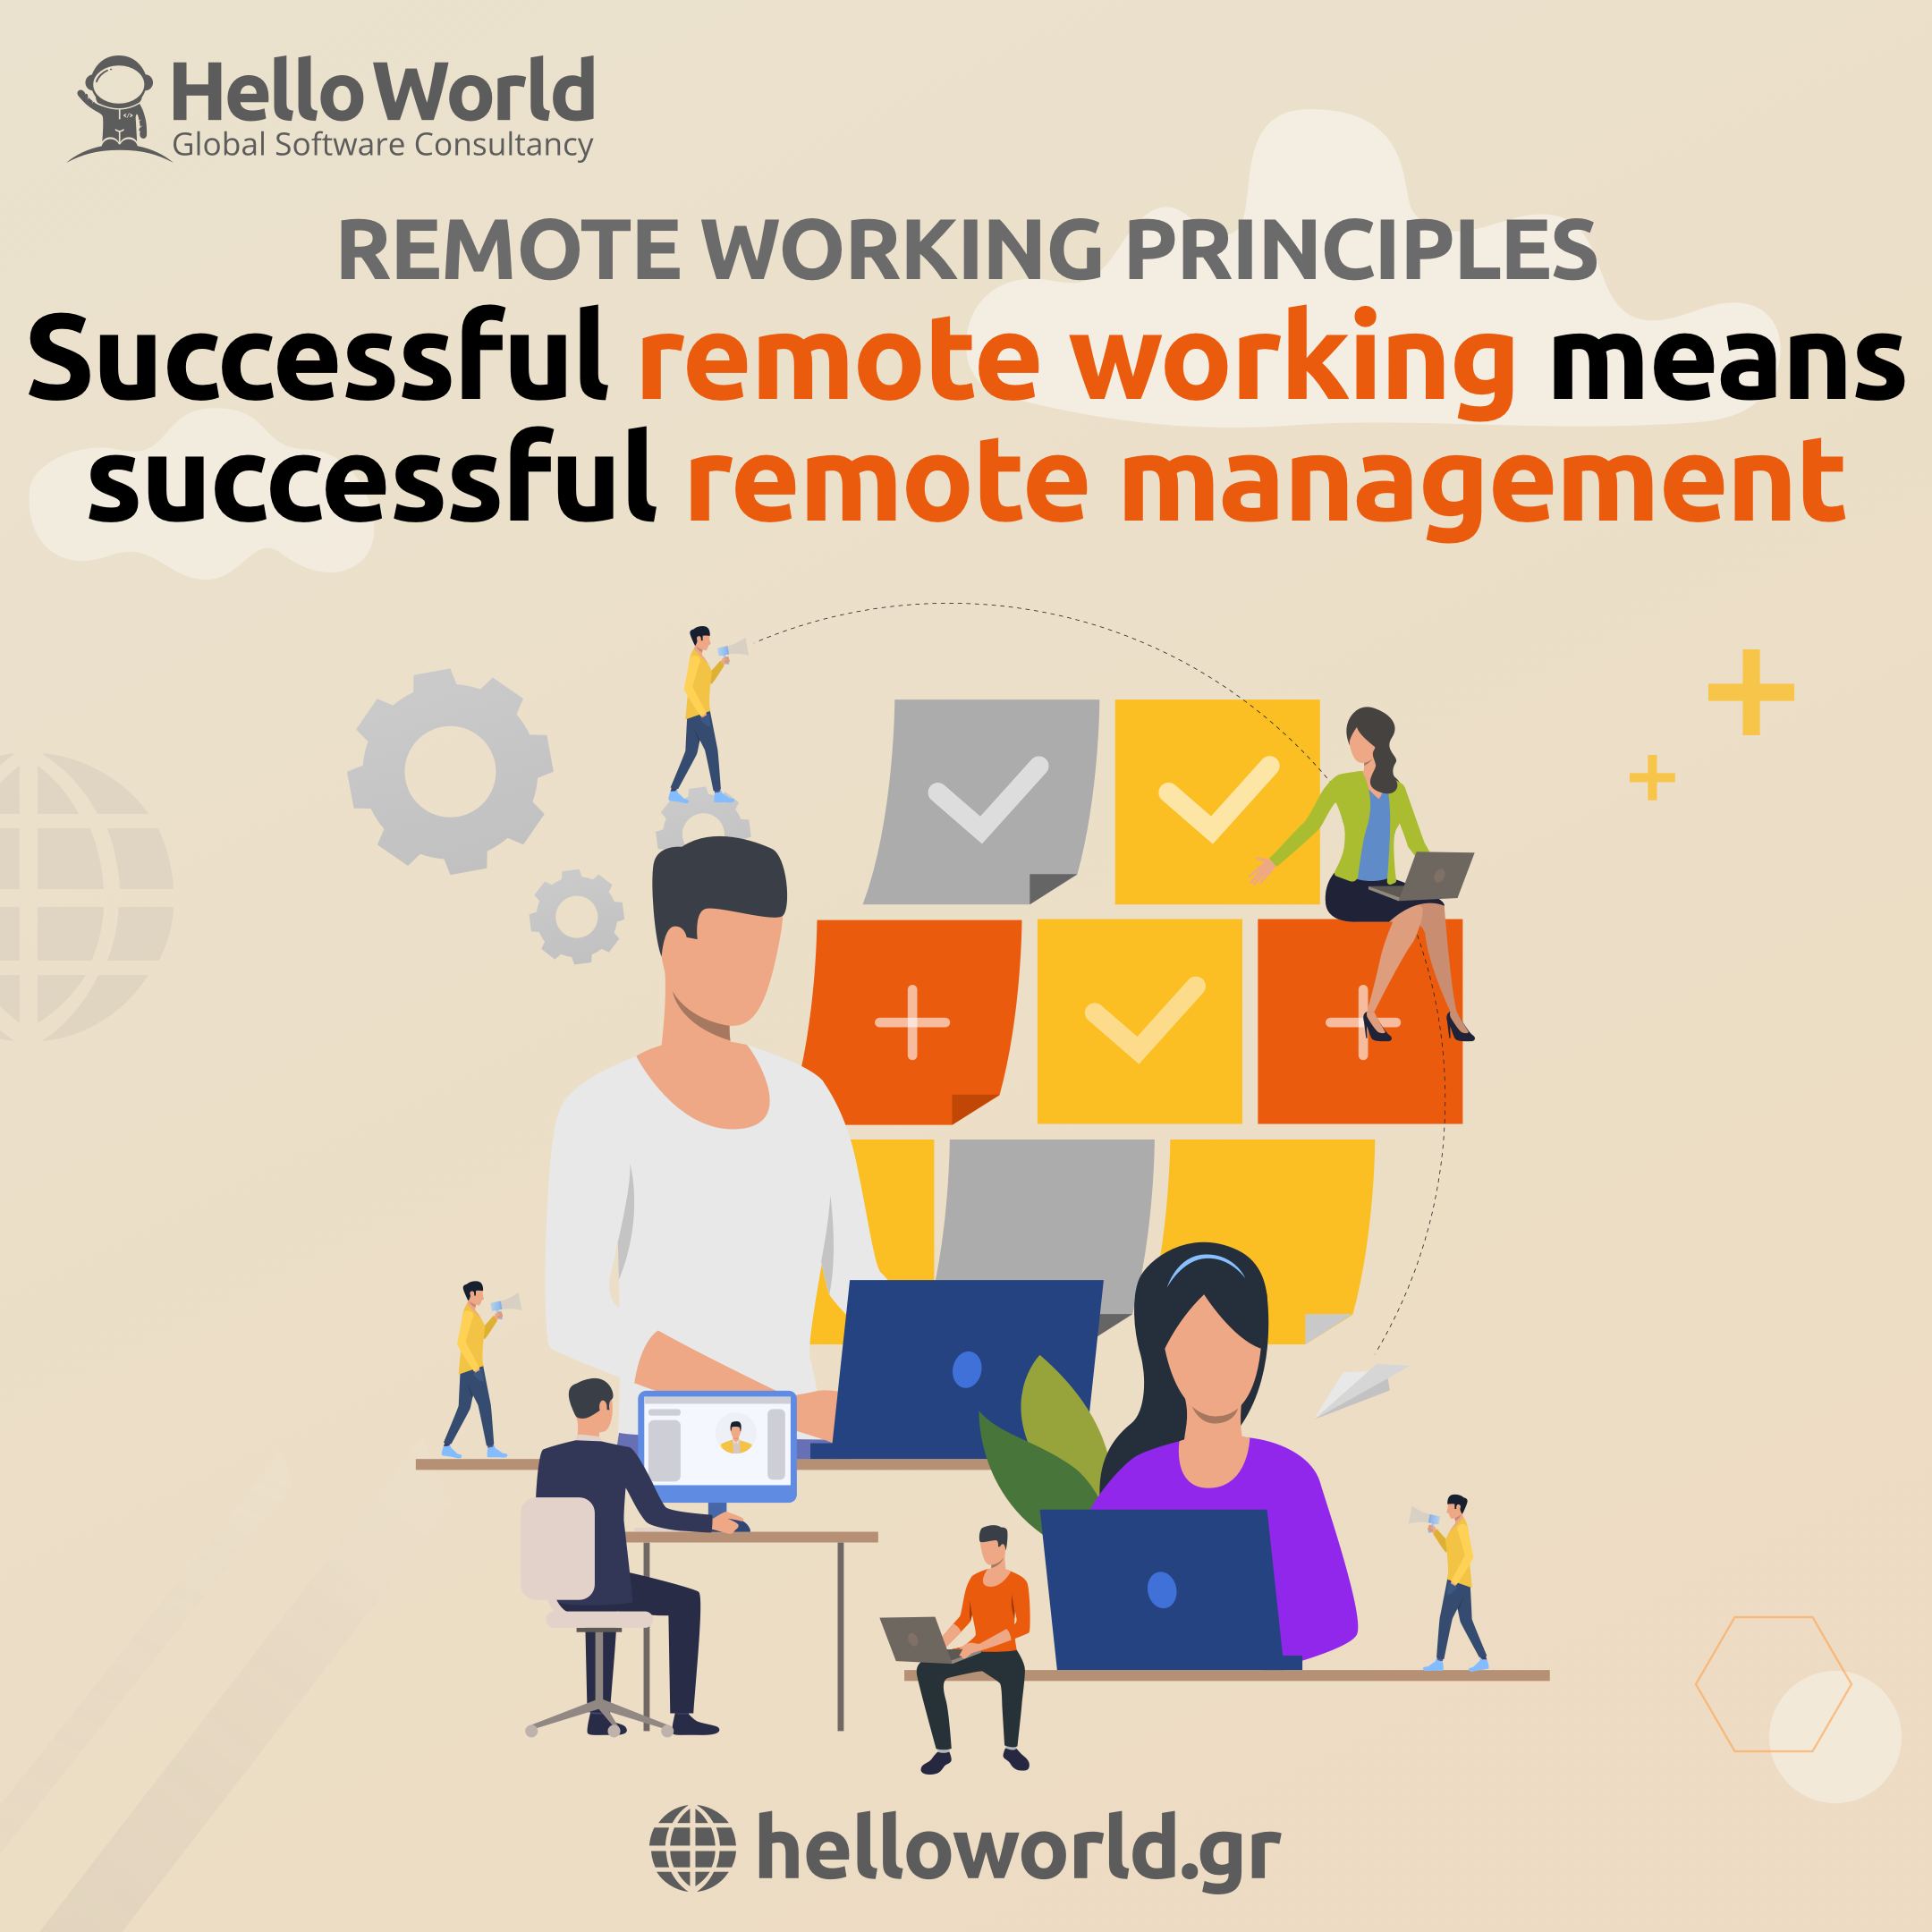 Successful remote working means successful remote management